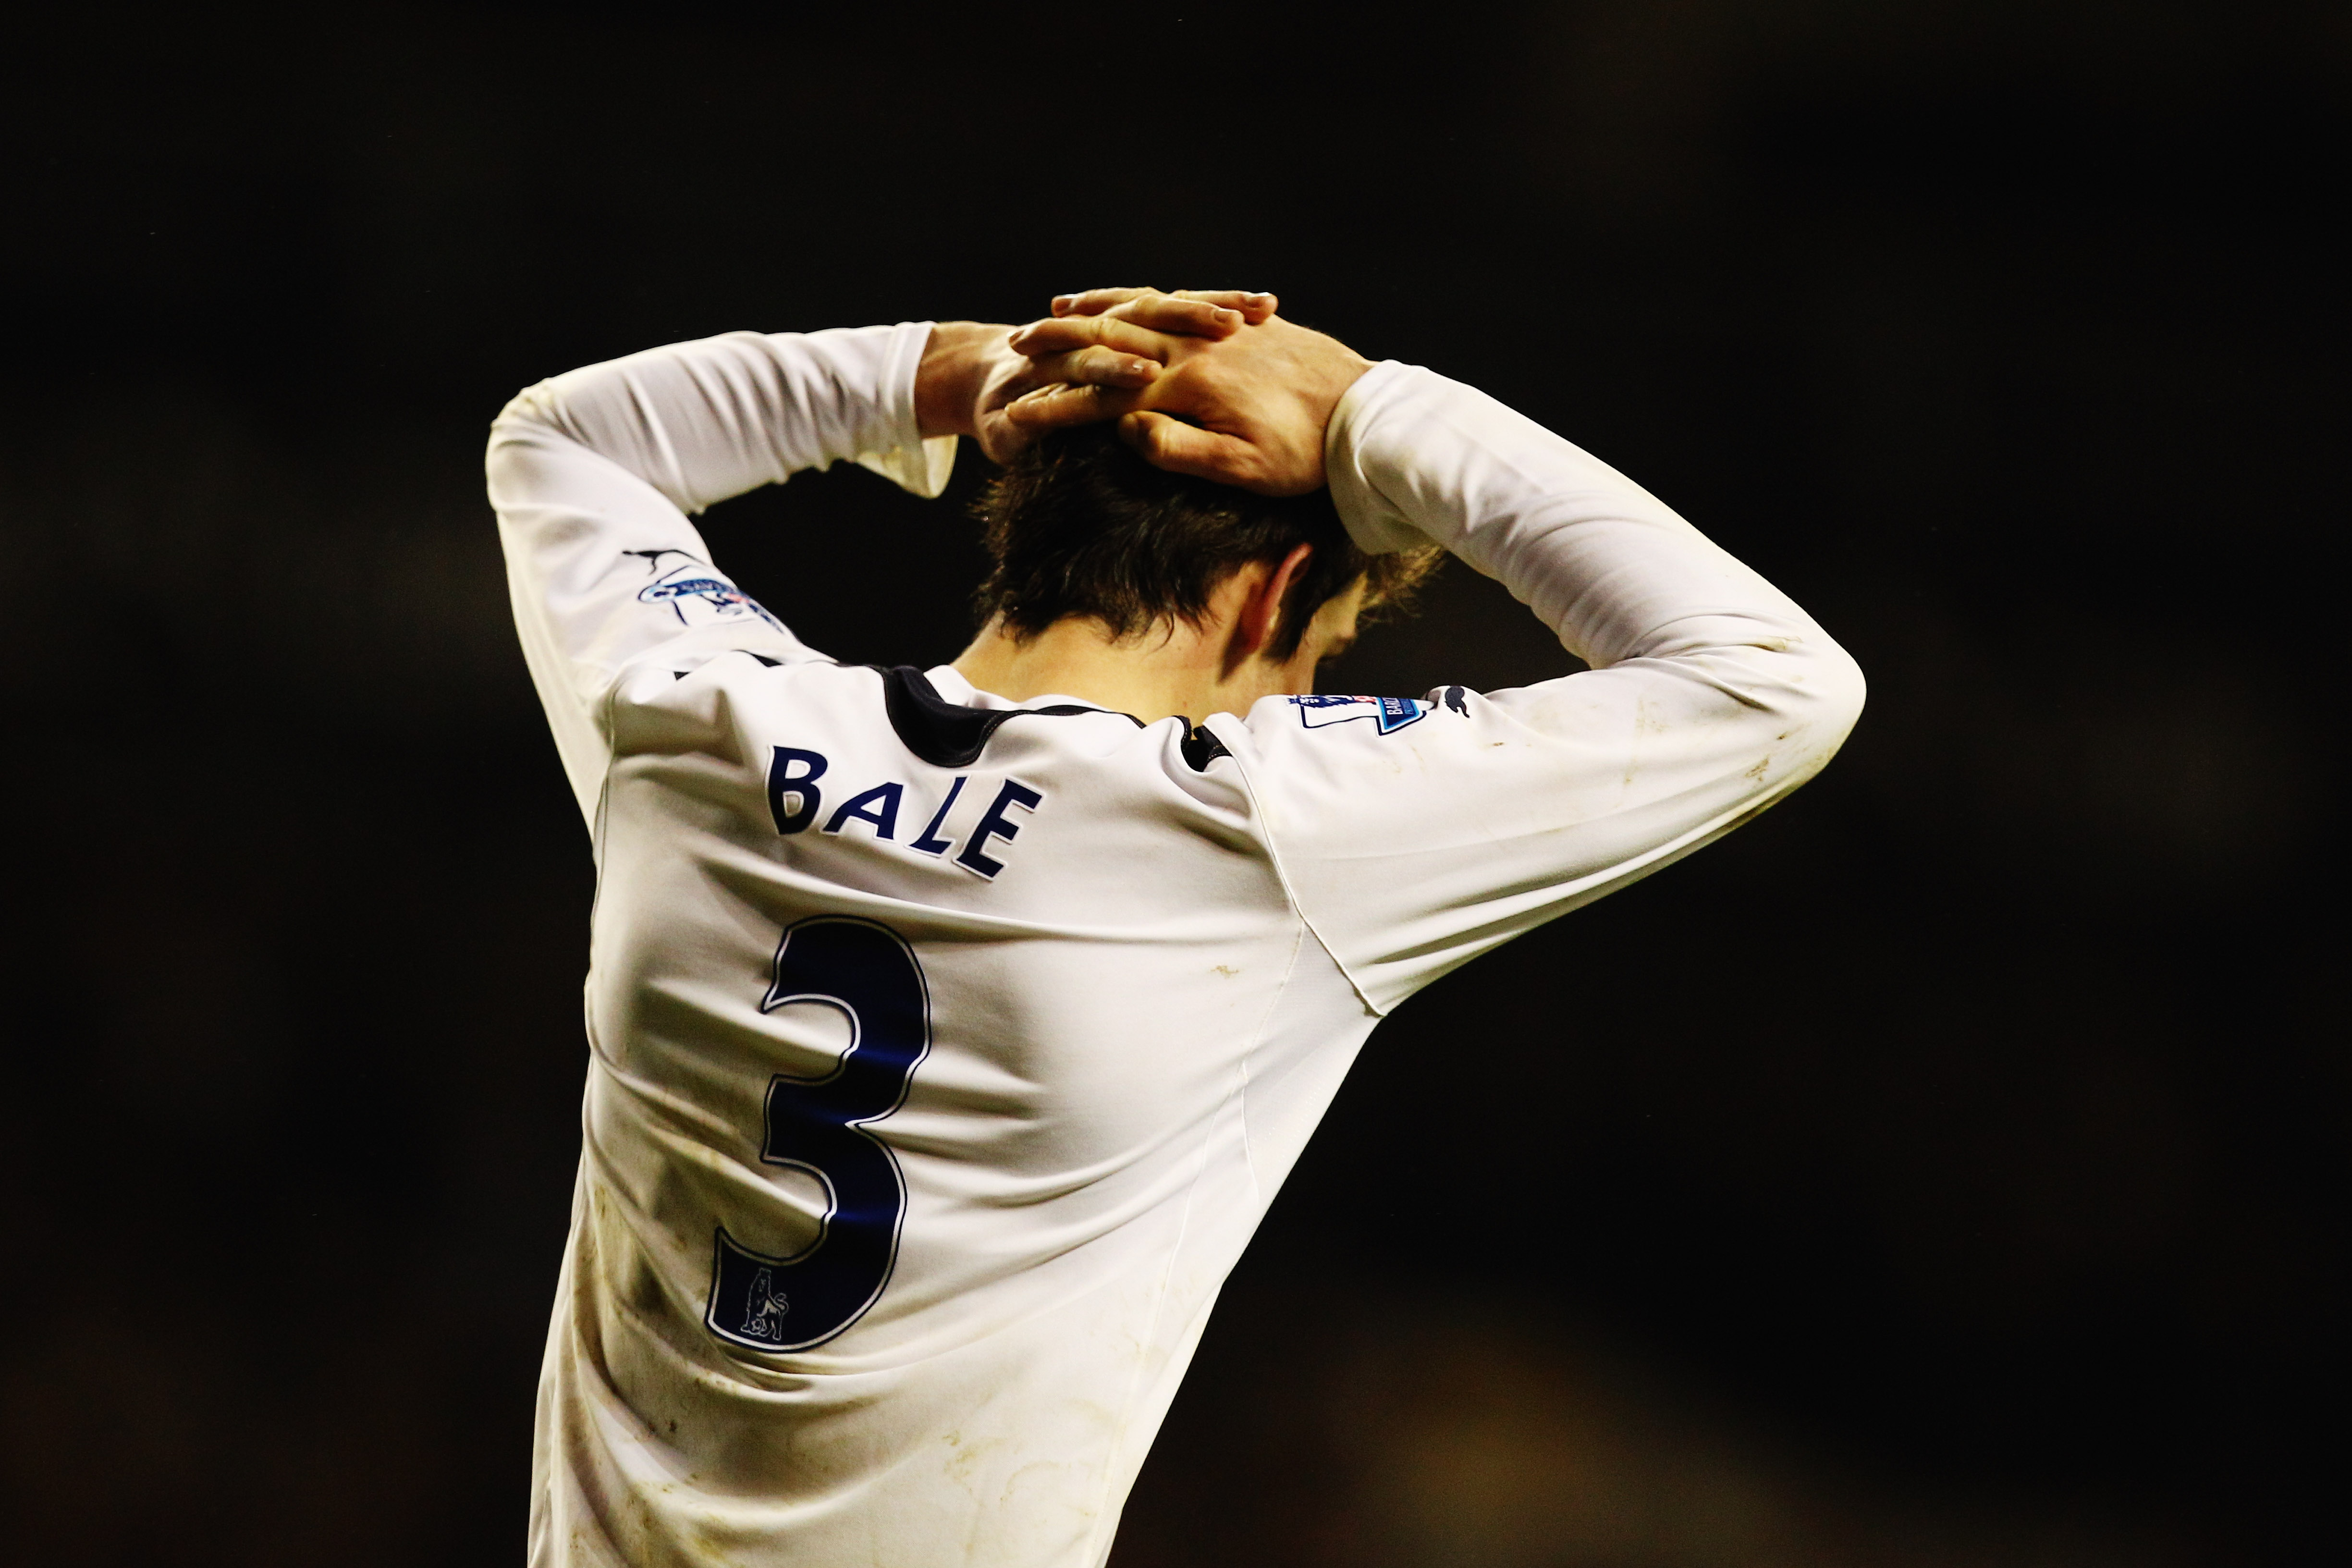 LONDON, UNITED KINGDOM - JANUARY 01:  Gareth Bale of Tottenham Hotspur reacts during the Barclays Premier League match between Tottenham Hotspur and Fulham at White Hart Lane on January 1, 2011 in London, England.  (Photo by Richard Heathcote/Getty Images